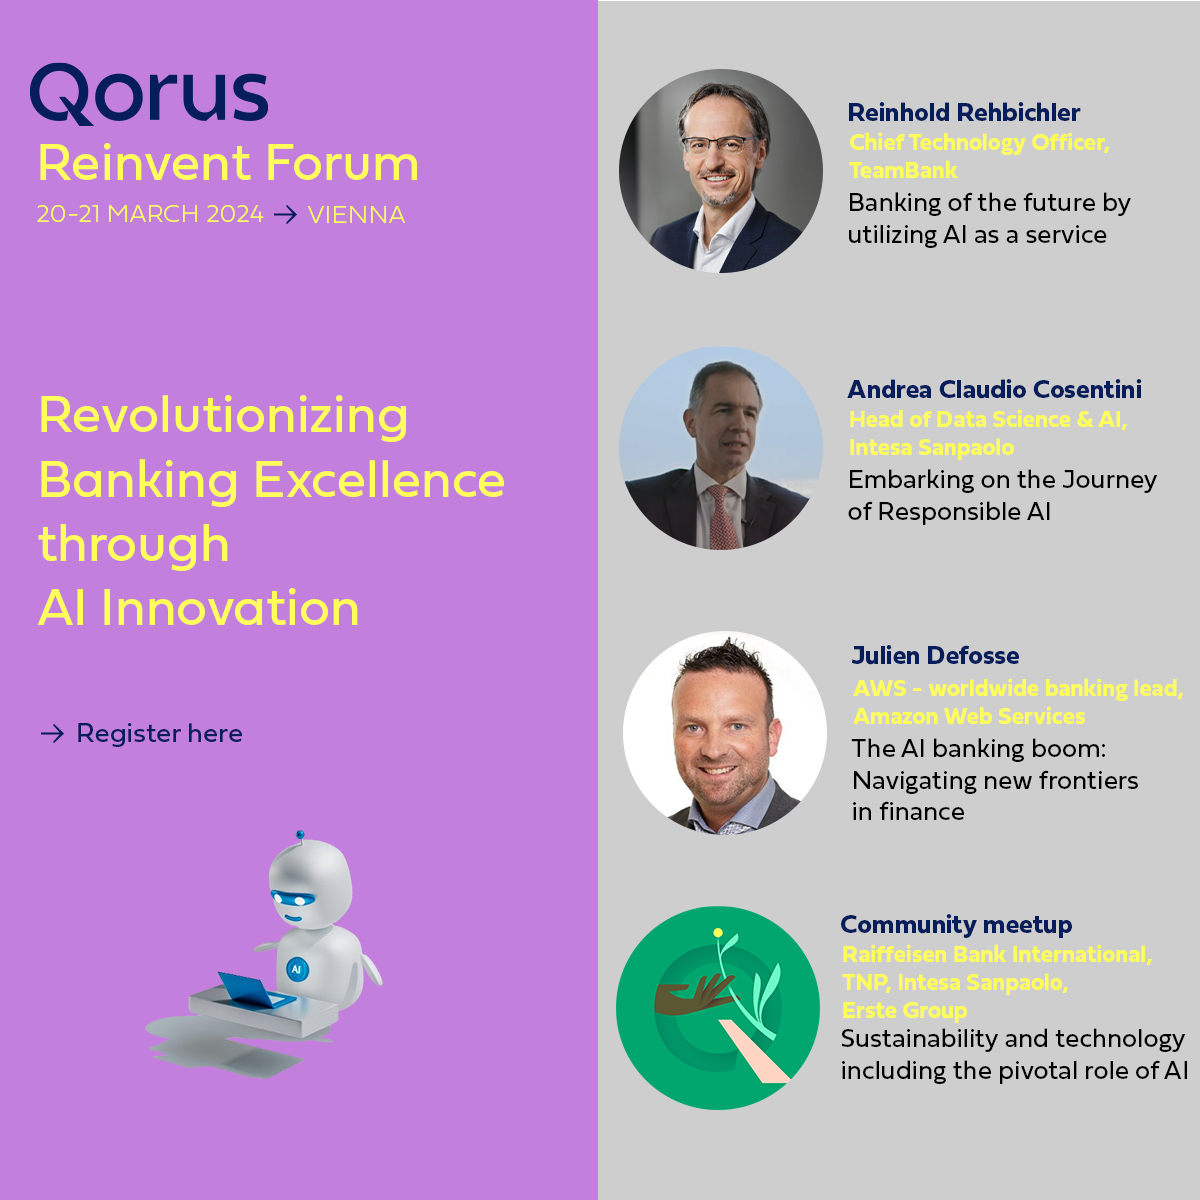 With AI becoming more prevalent, choices are limited. Seize the forefront of innovation by integrating AI into your strategies and transform your business. Visit our page to learn more about the sessions👉 qorusglobal.com/event/19058-re… #RIFVienna24 #AI #ArtificialIntelligence